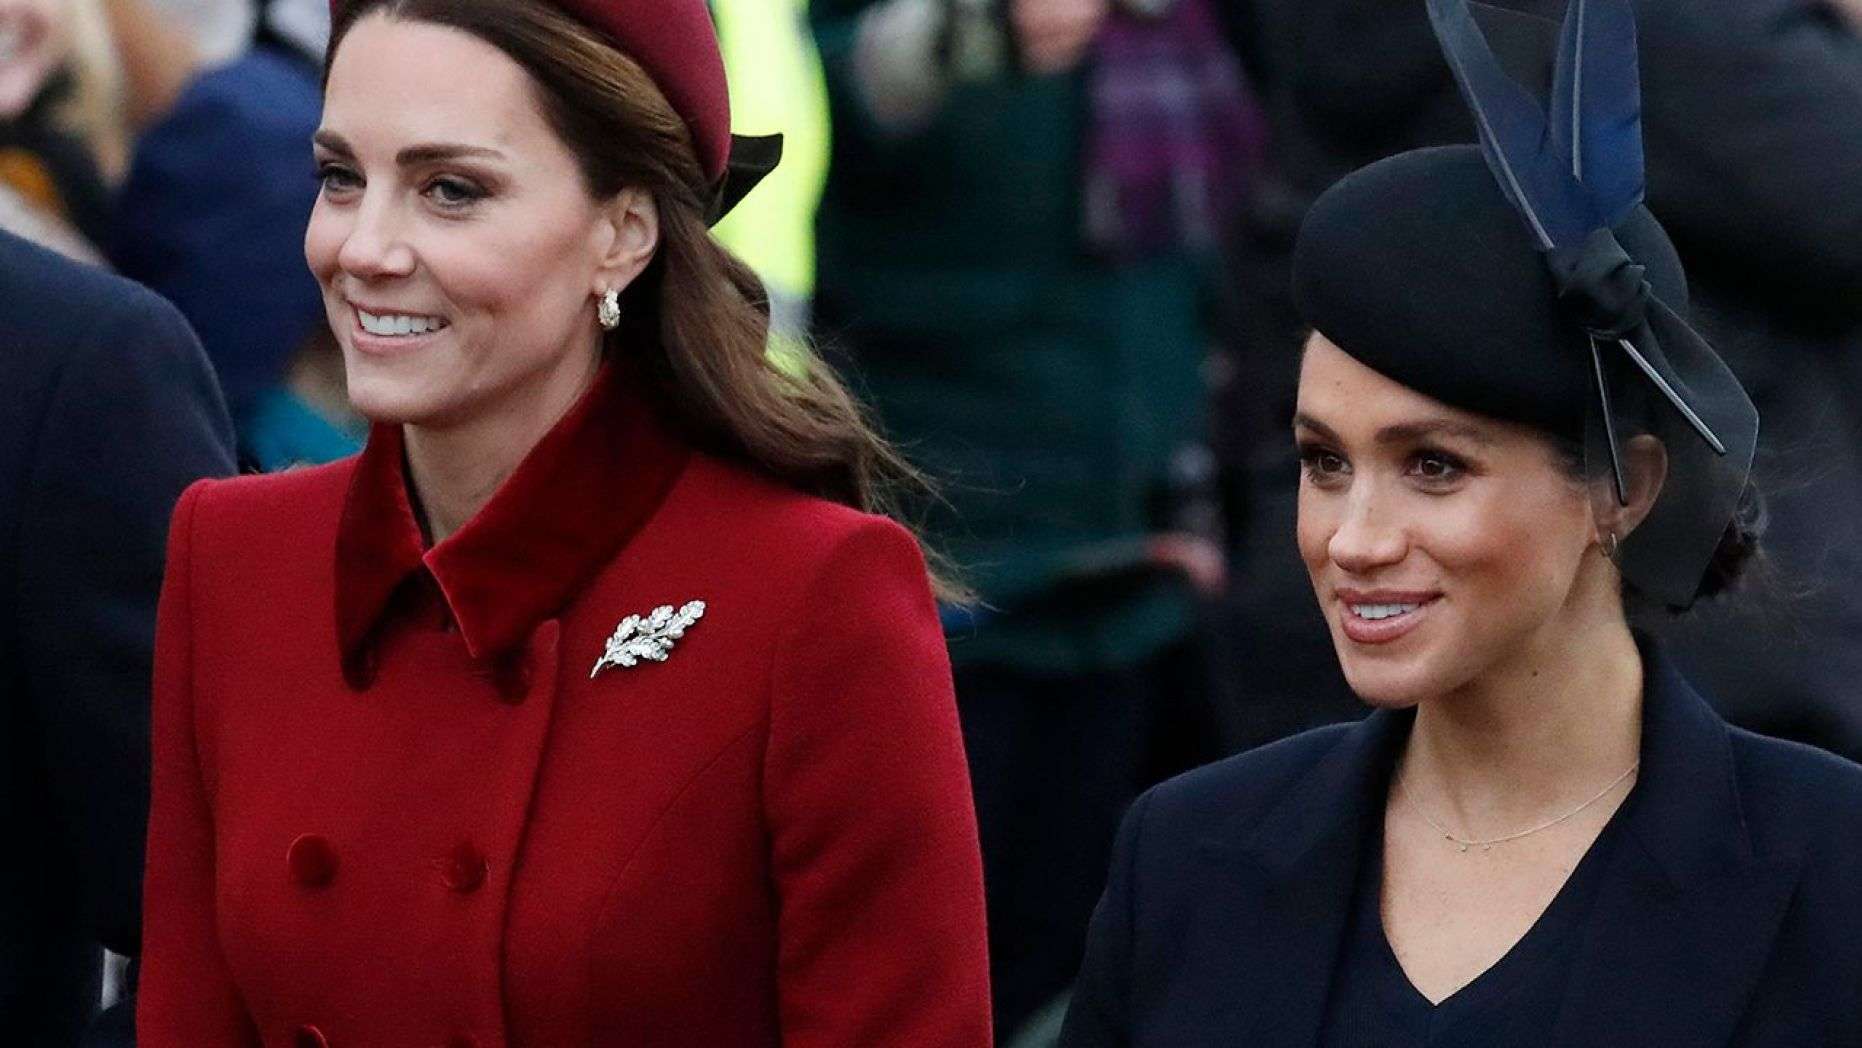 Meghan Markle, Prince Harry join Kate Middleton, Prince William for Christmas Day service amid feud rumors